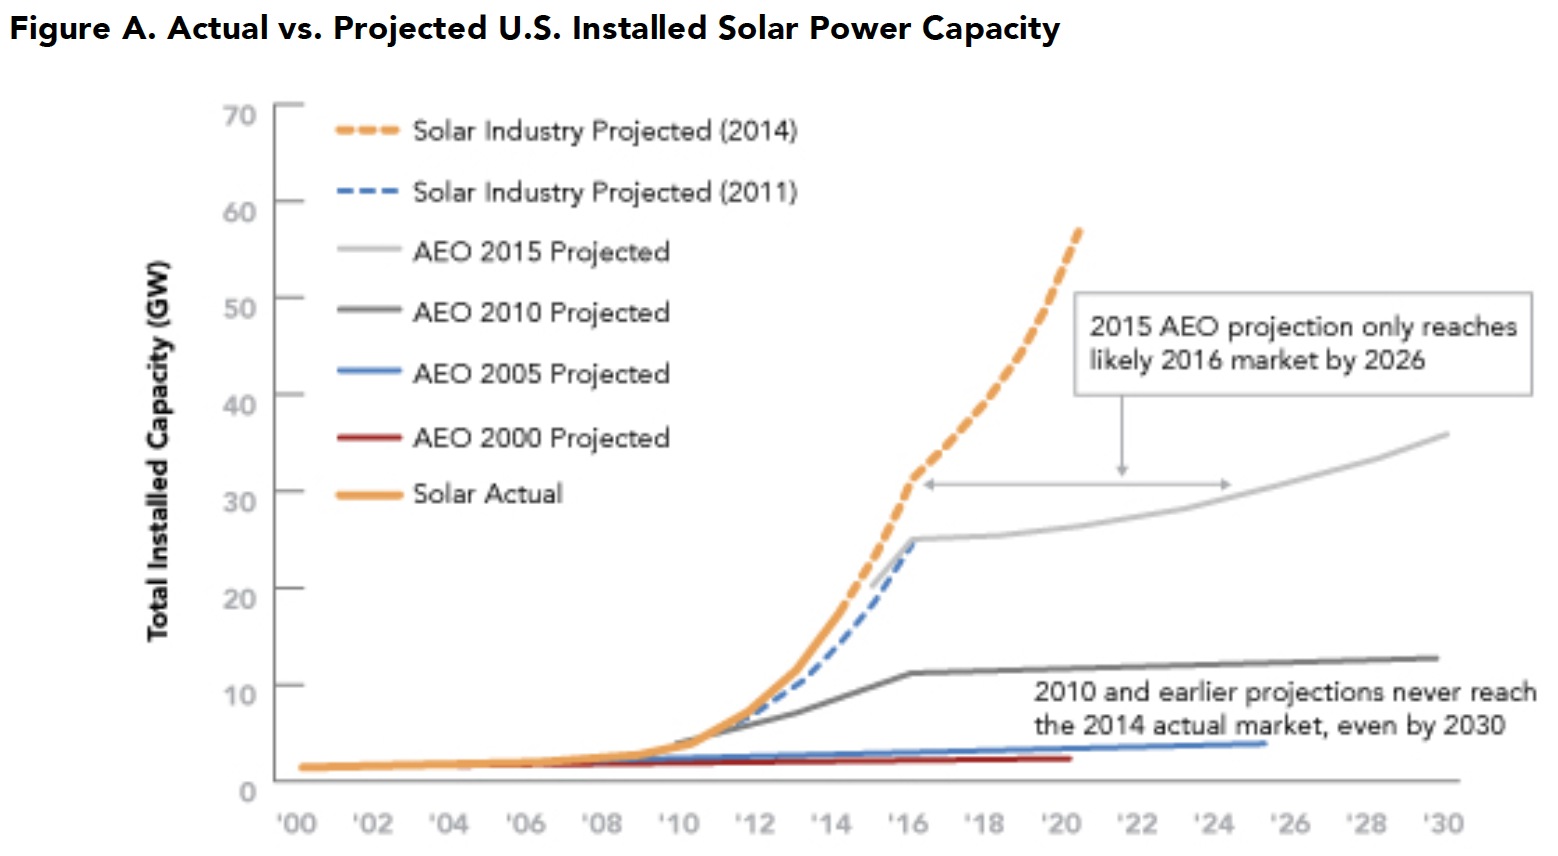 Figure A. Actual vs. Projected U.S. Installed Solar Power Capacity